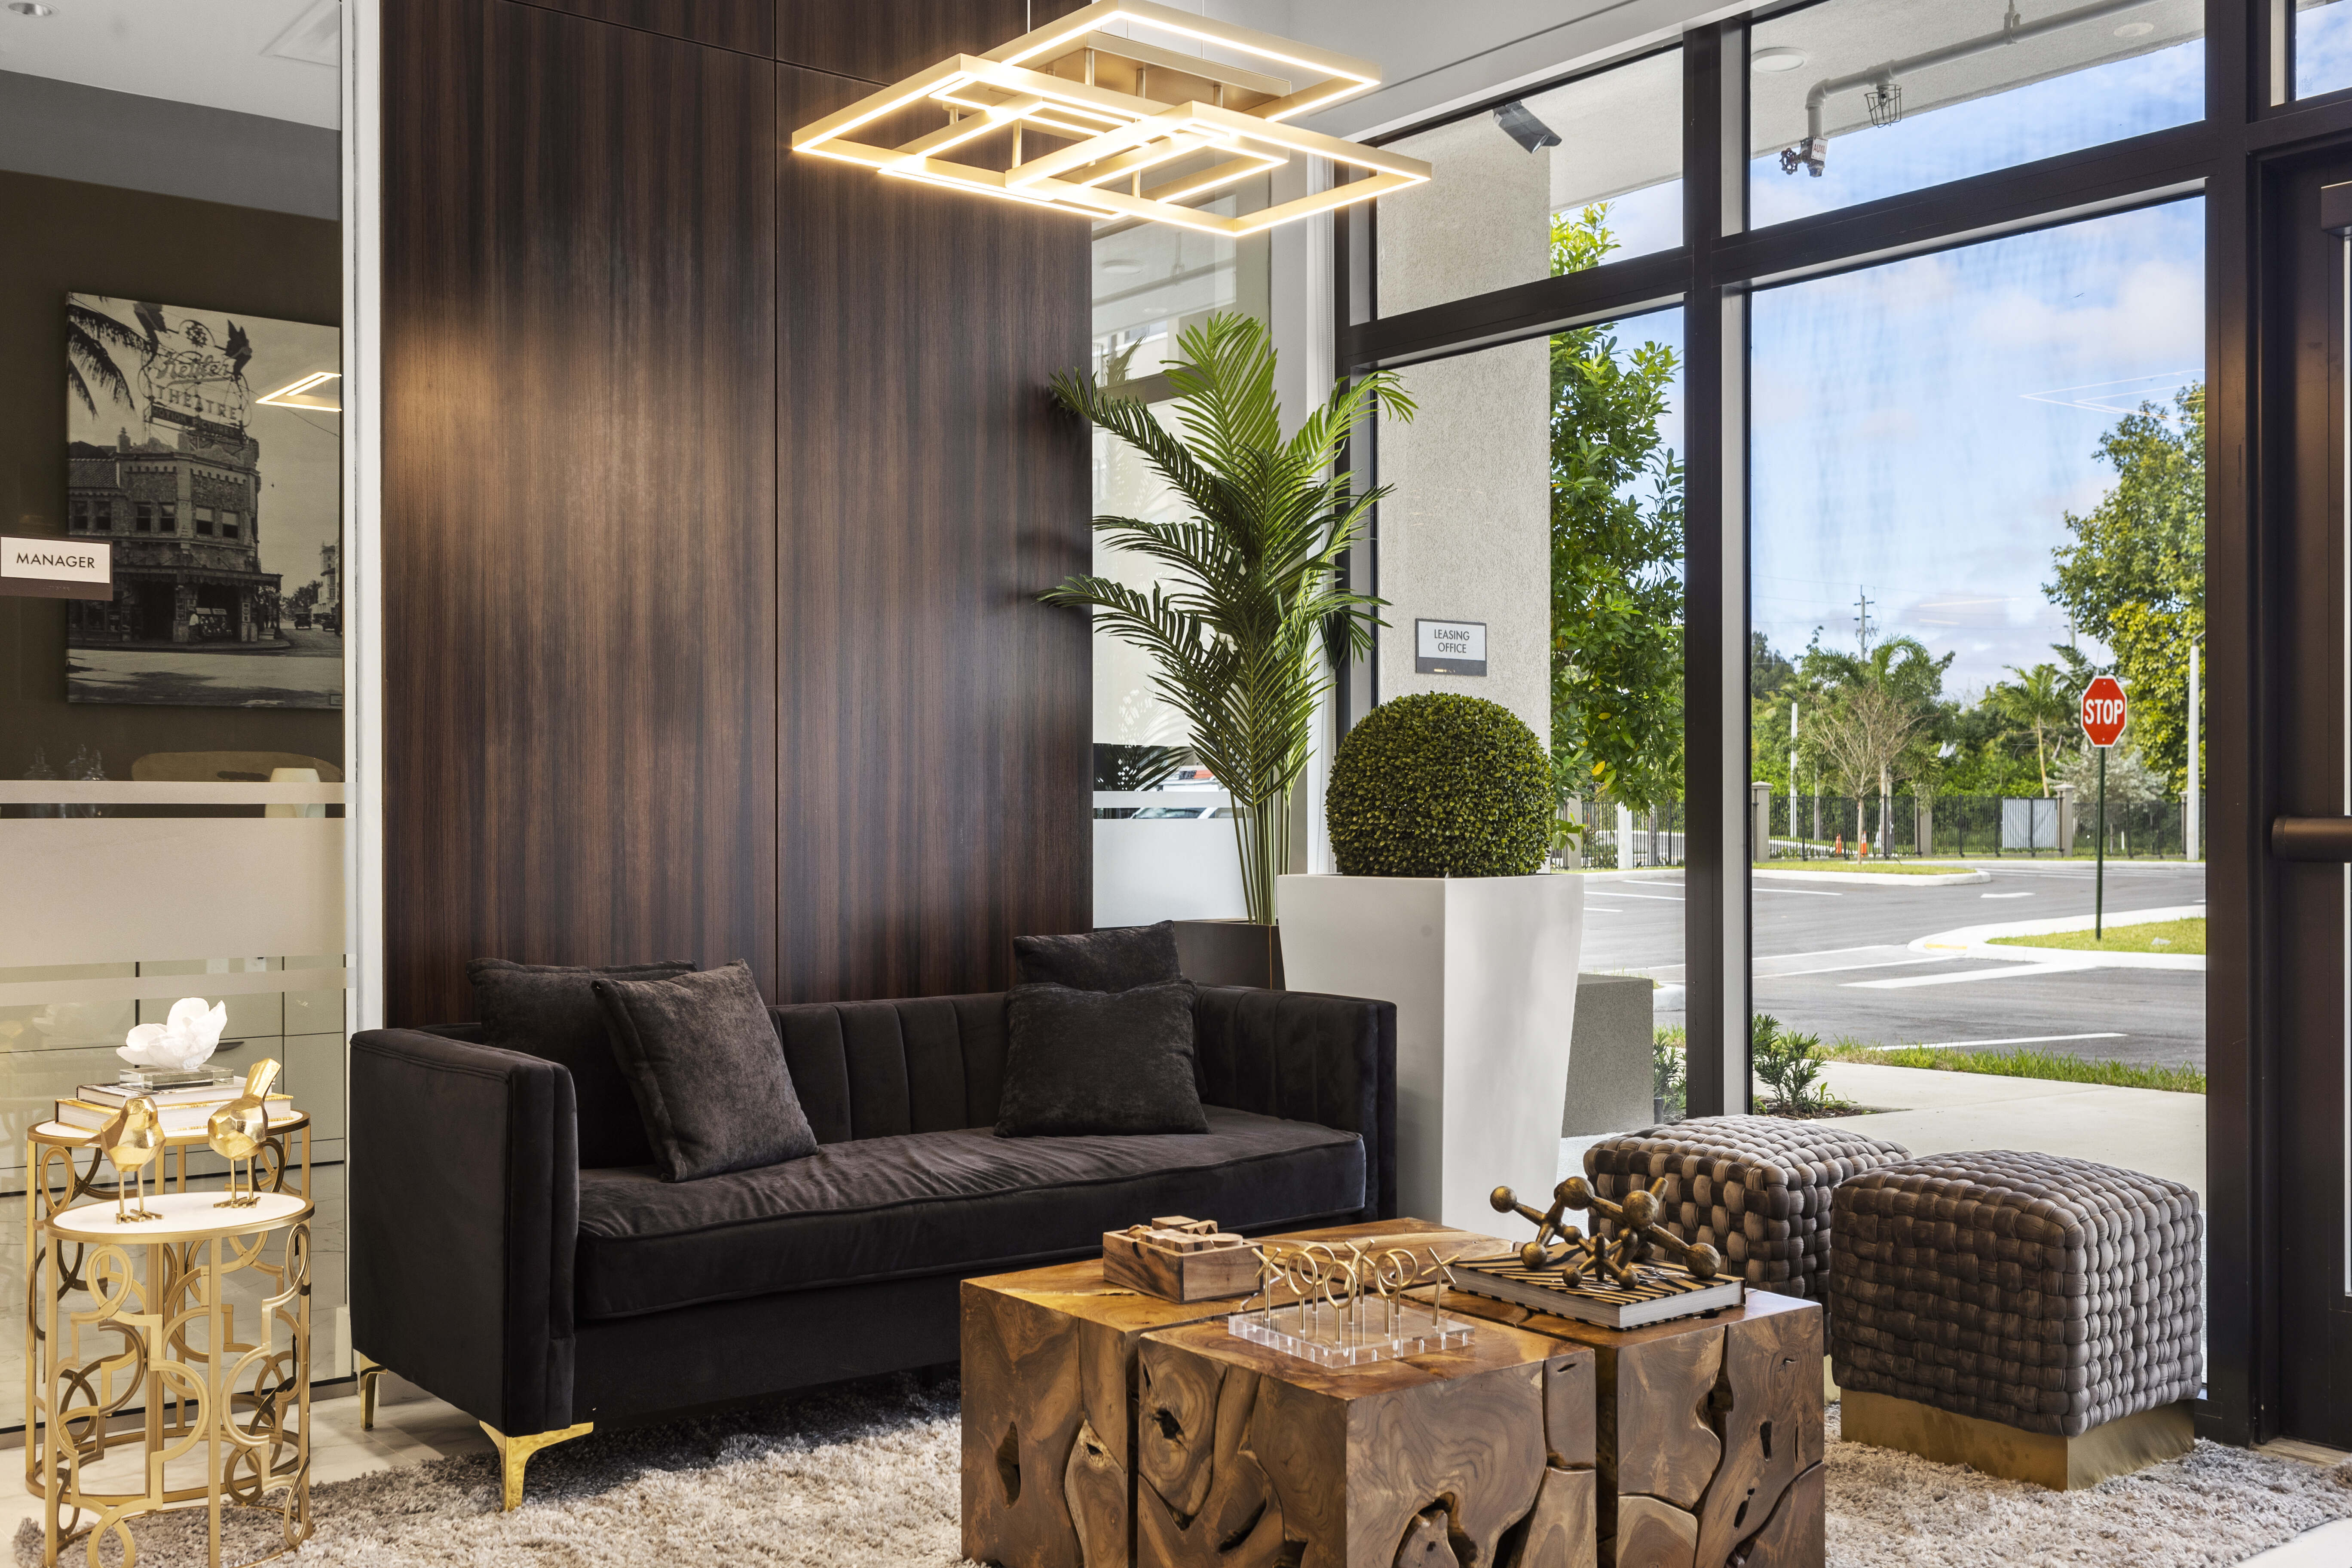 Modern furnishings at the entryway of Pine Ridge in West Palm Beach, Florida